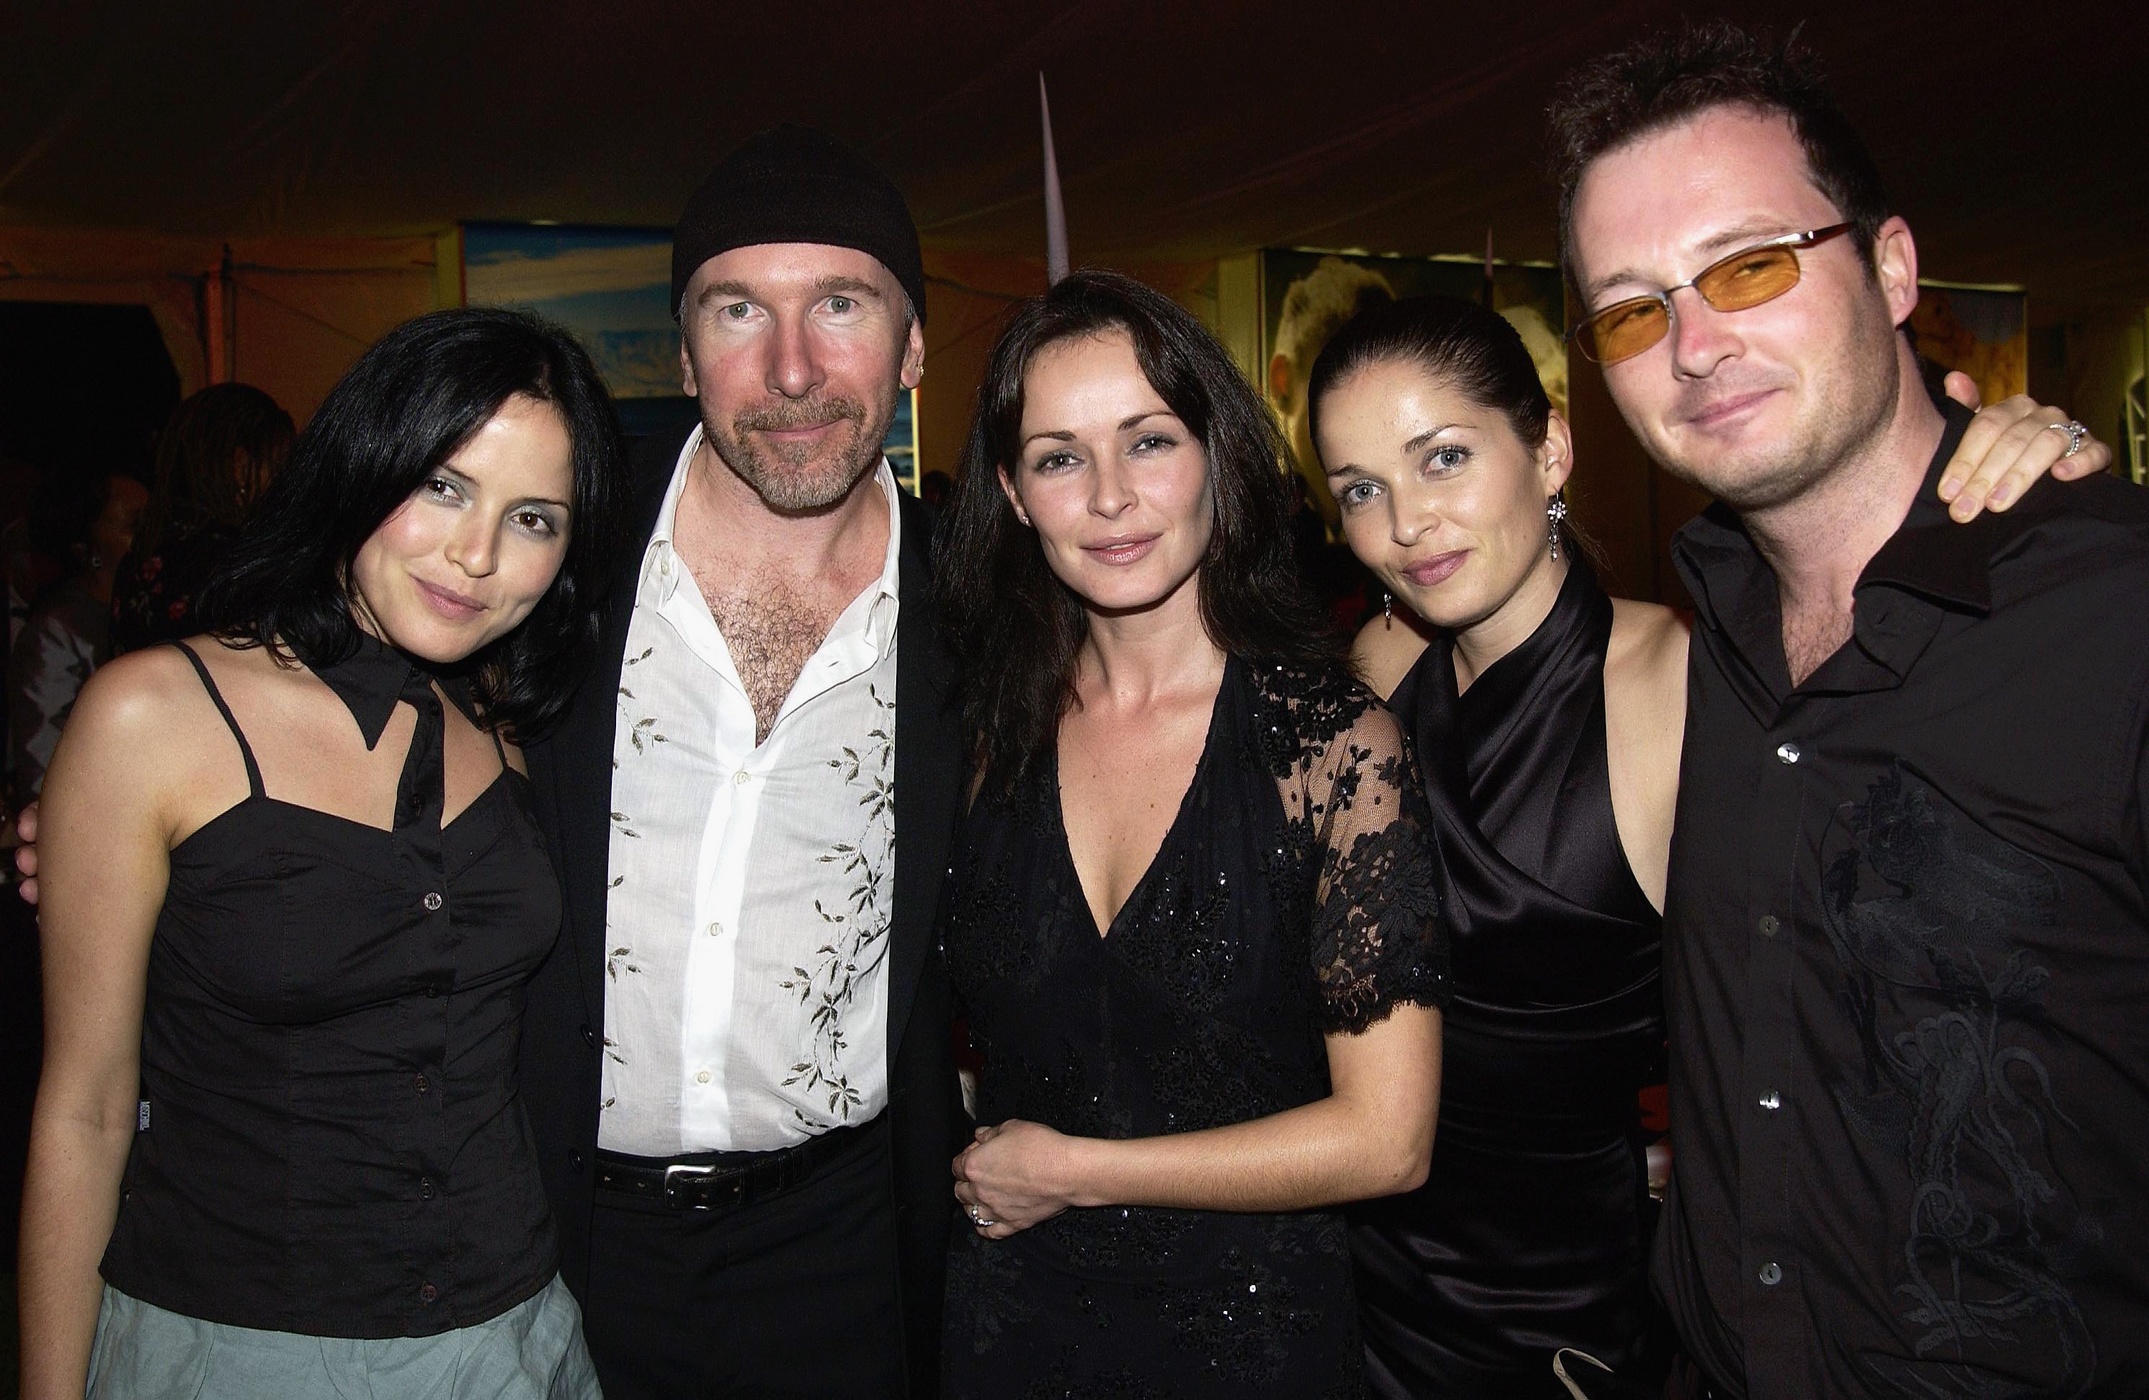 The Corrs Photo Of Pics Wallpaper Theplace2